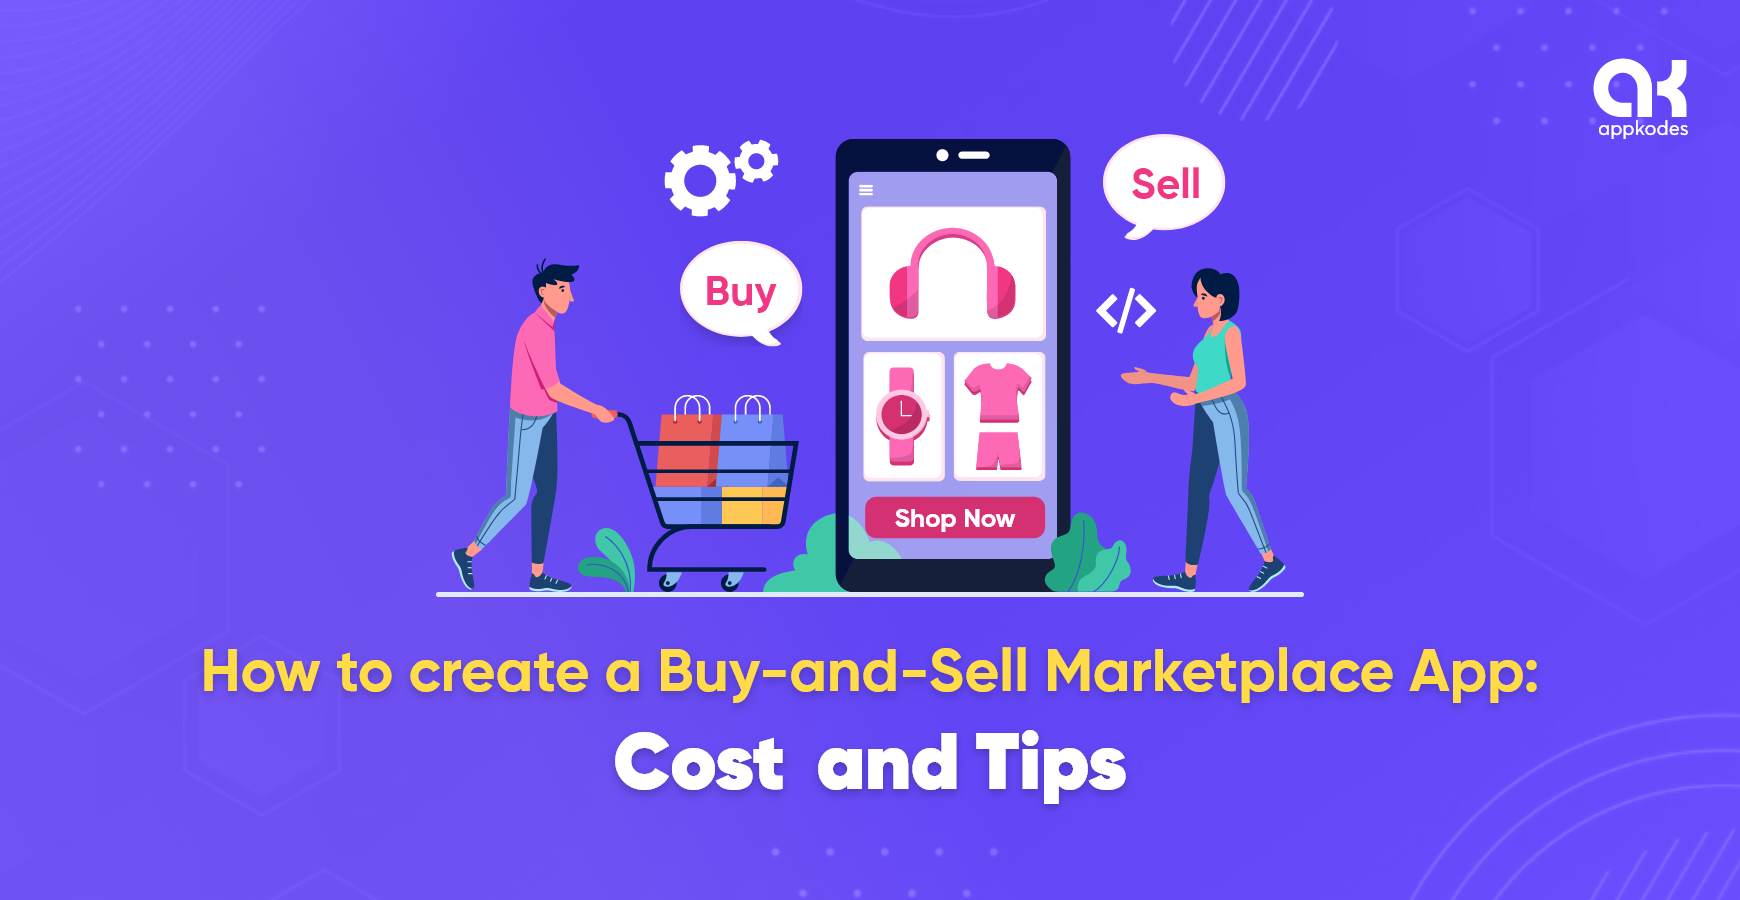 How to Build a Buy sell Marketplace App Cost and Tips